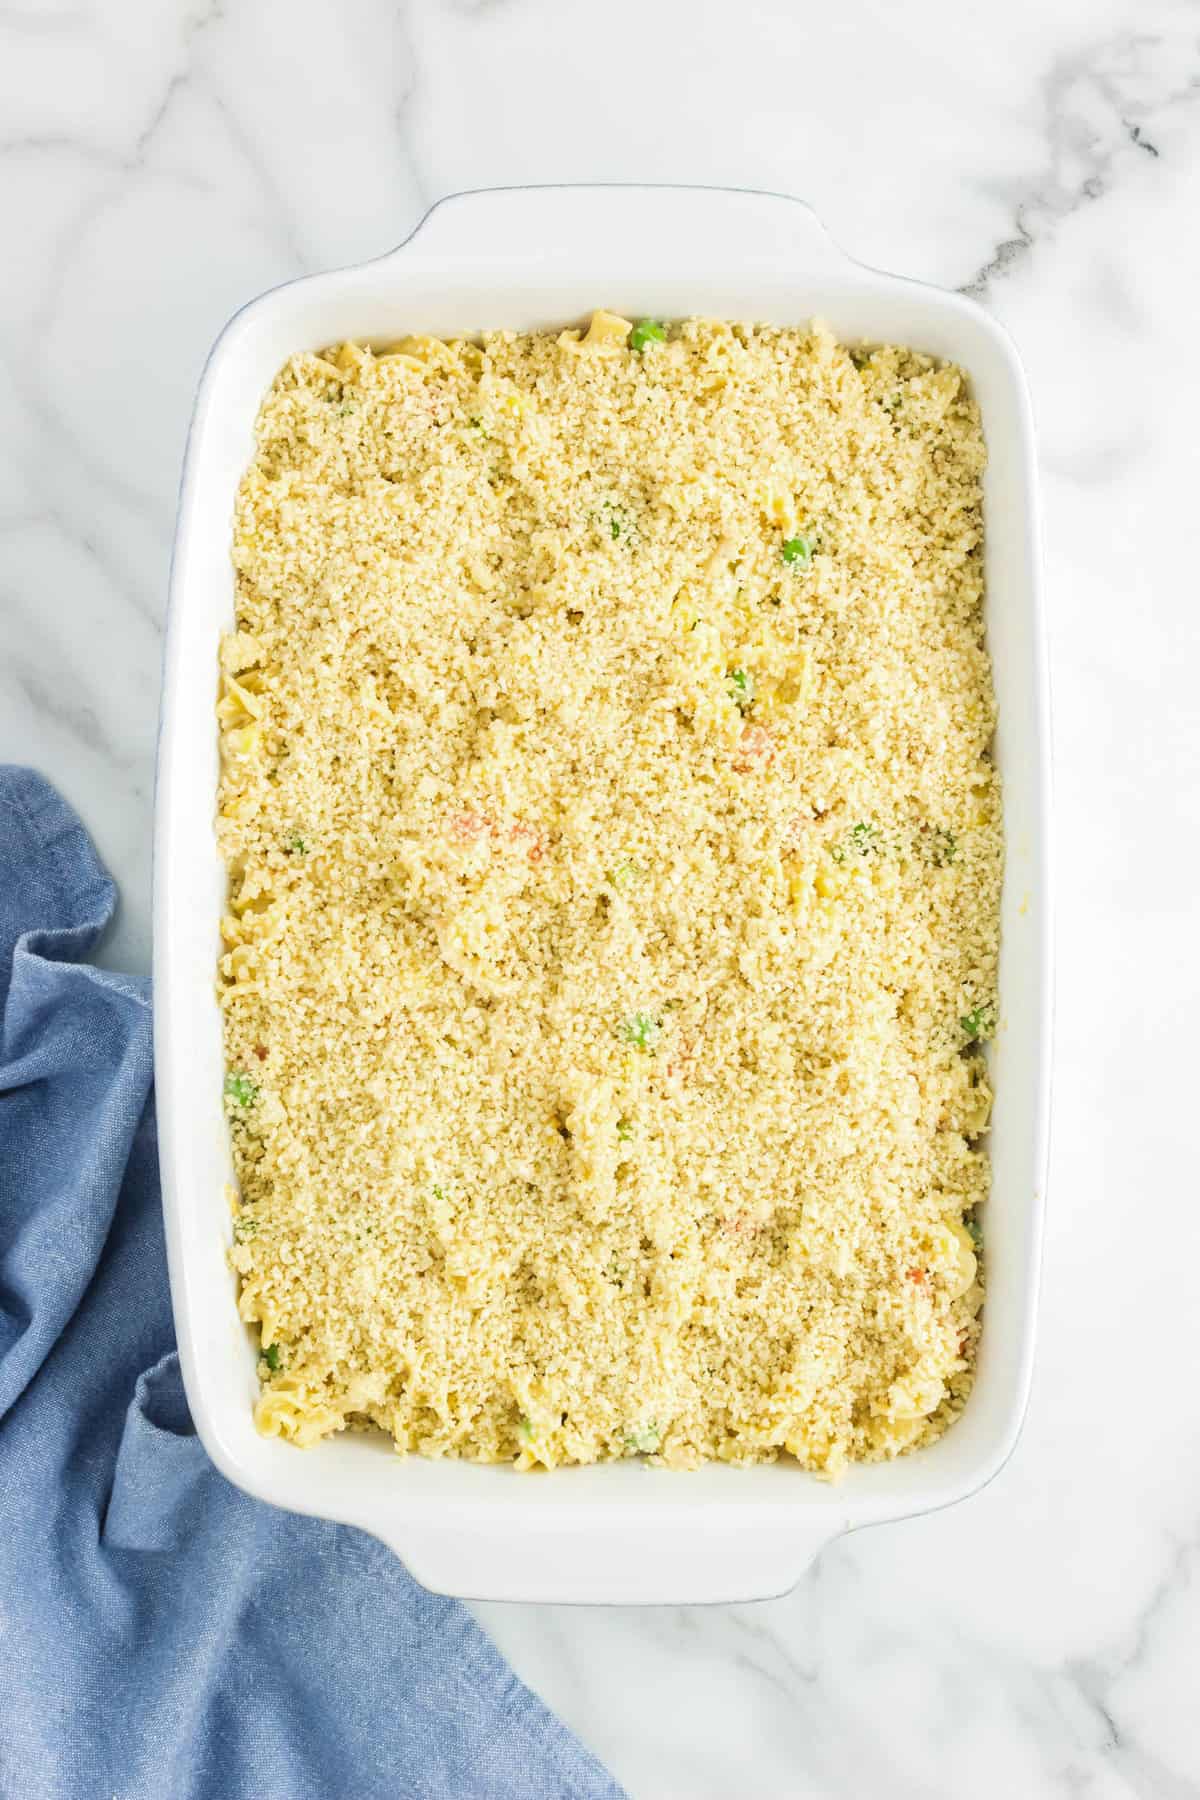 Topping Chicken Noodle Casserole with panko crumbs in 9x13 baking dish